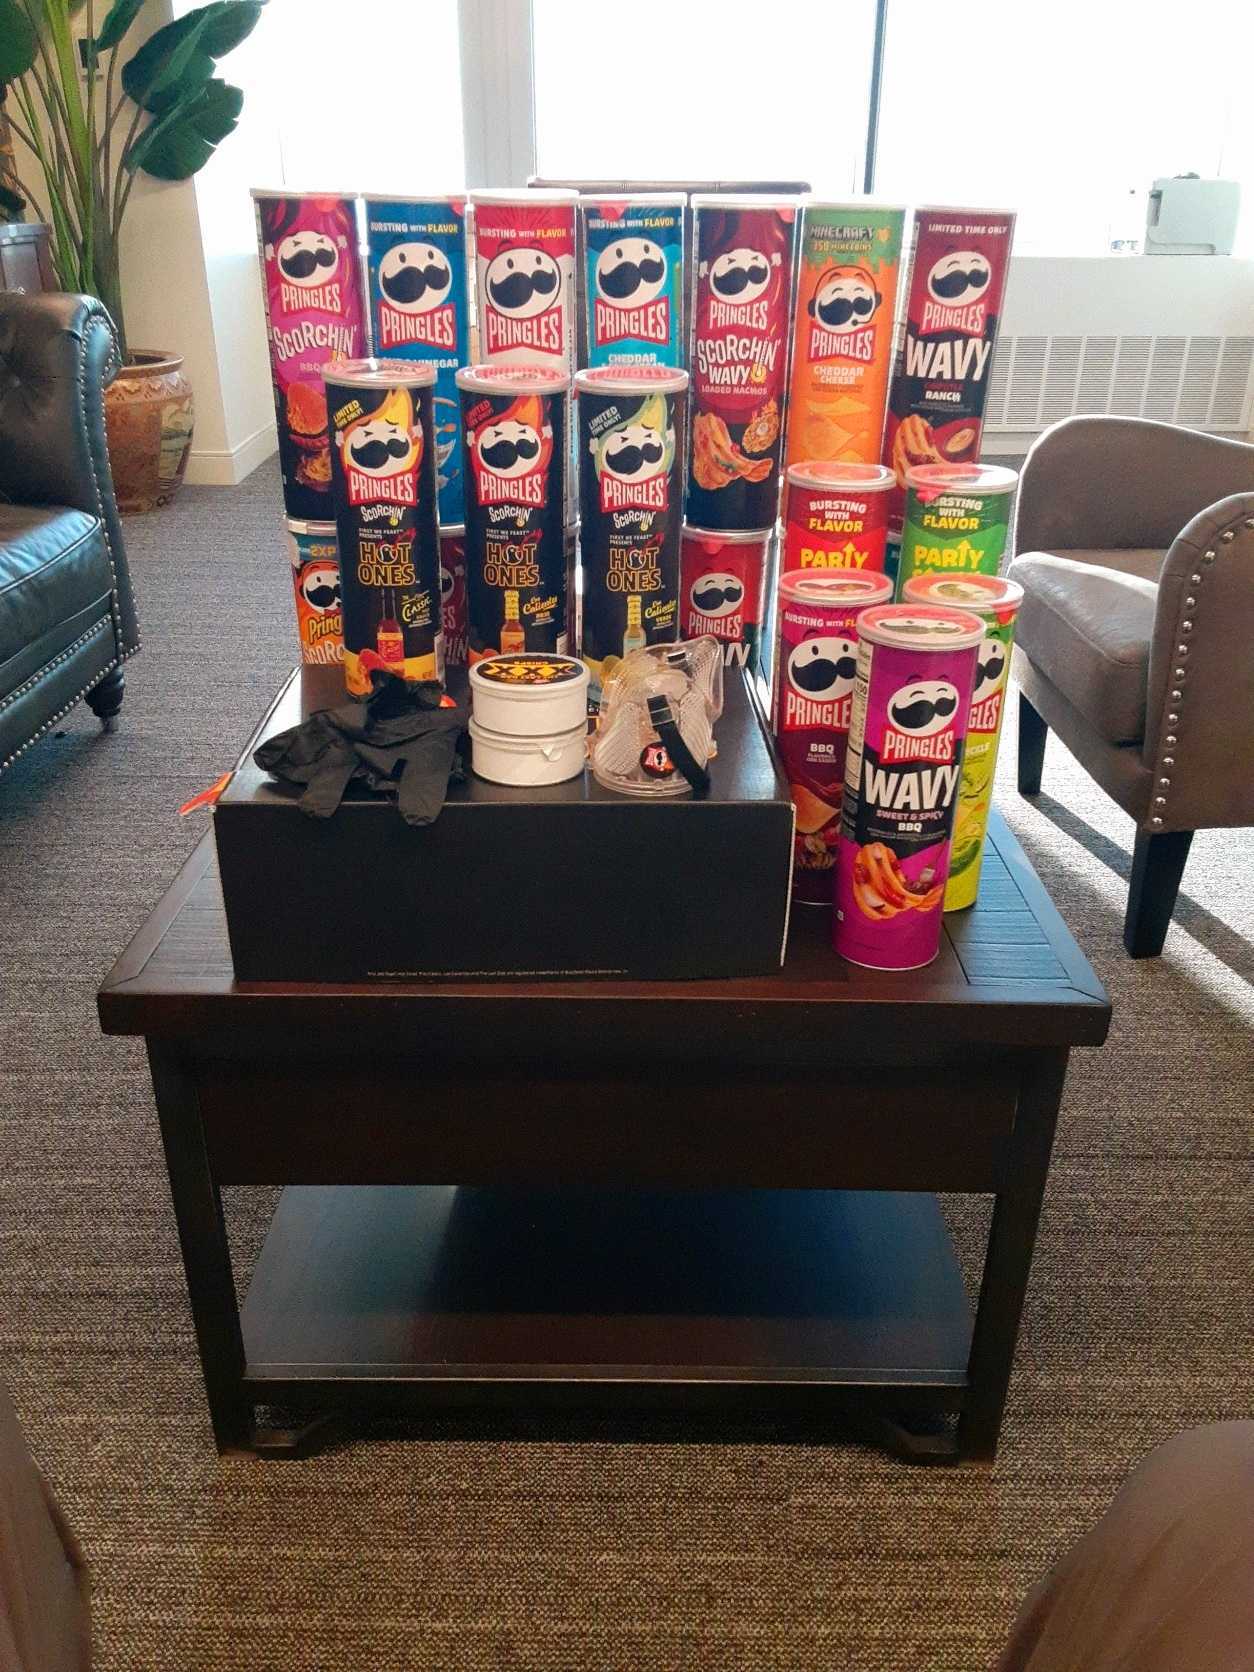 A bunch of cans of Pringles of different flavors on a desk in an office.